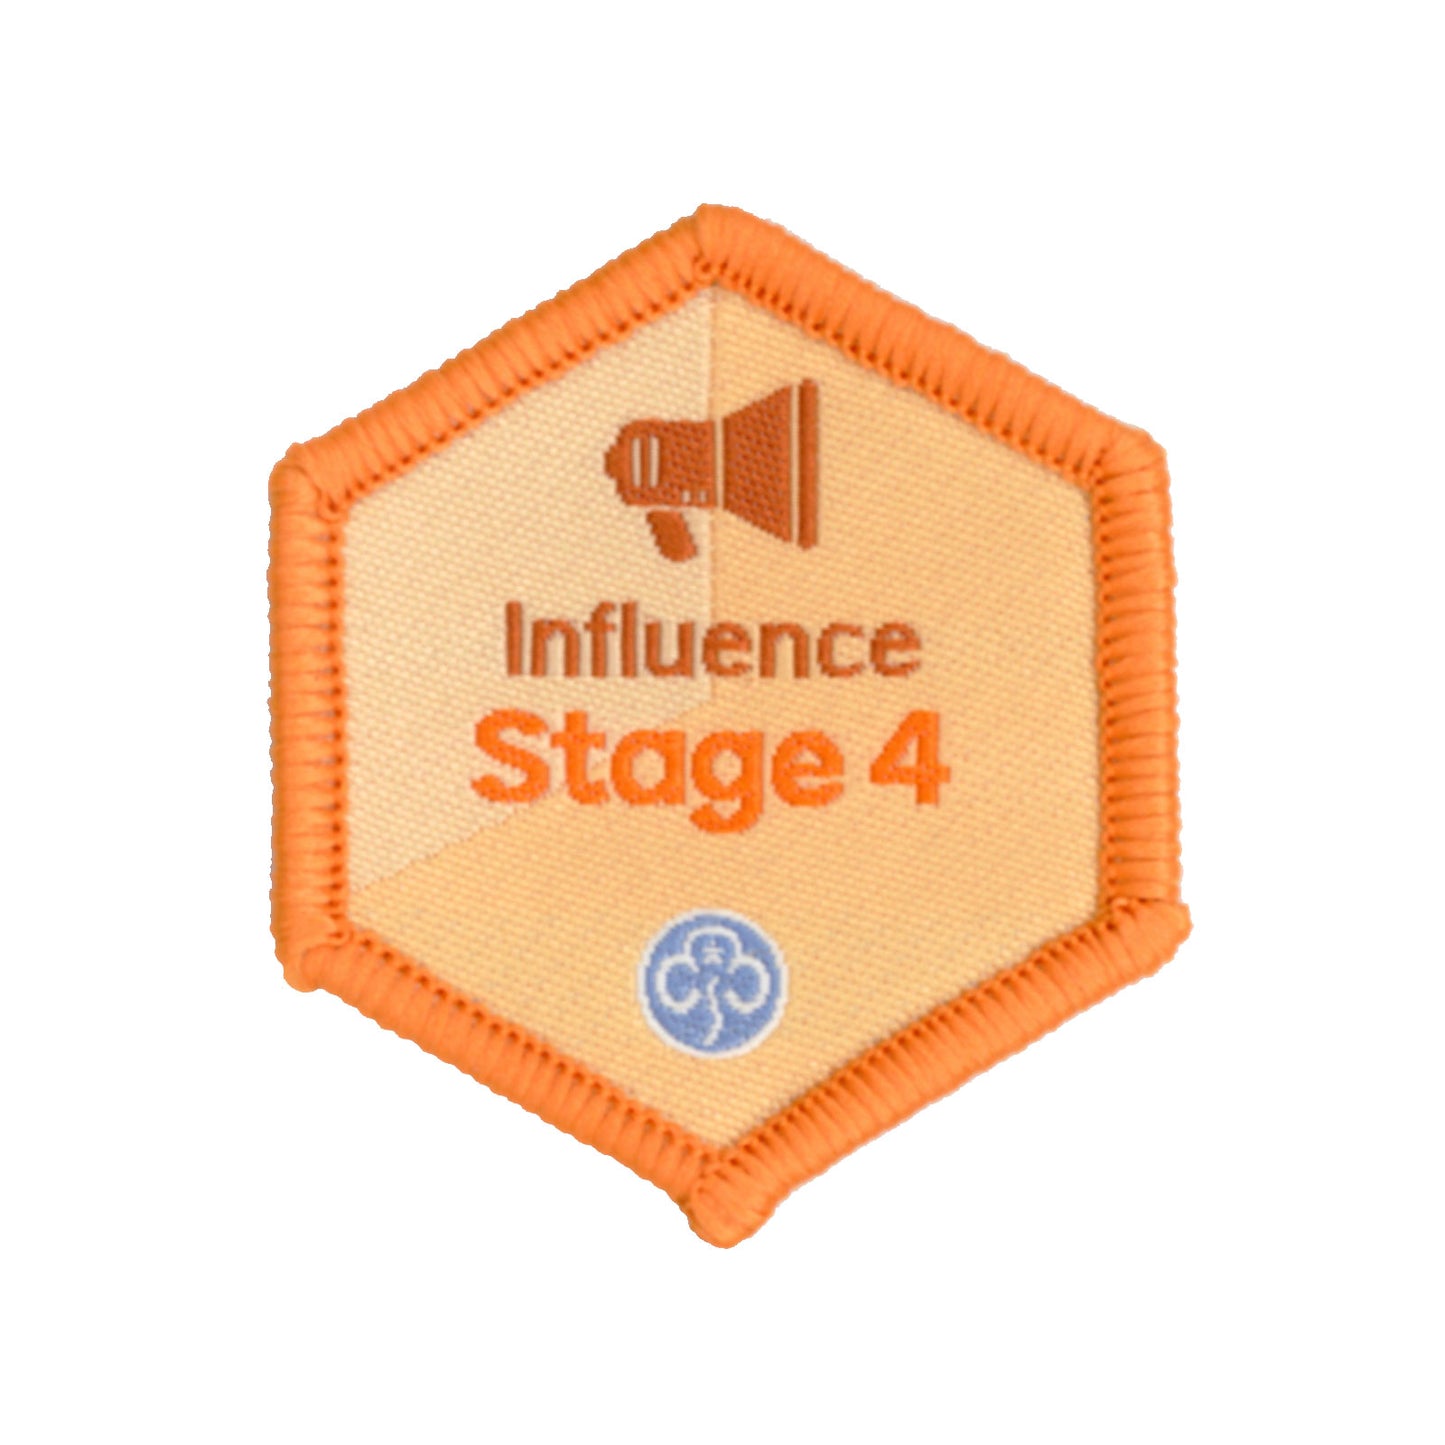 Skills Builder - Take Action - Influence Stage 4 Woven Badge